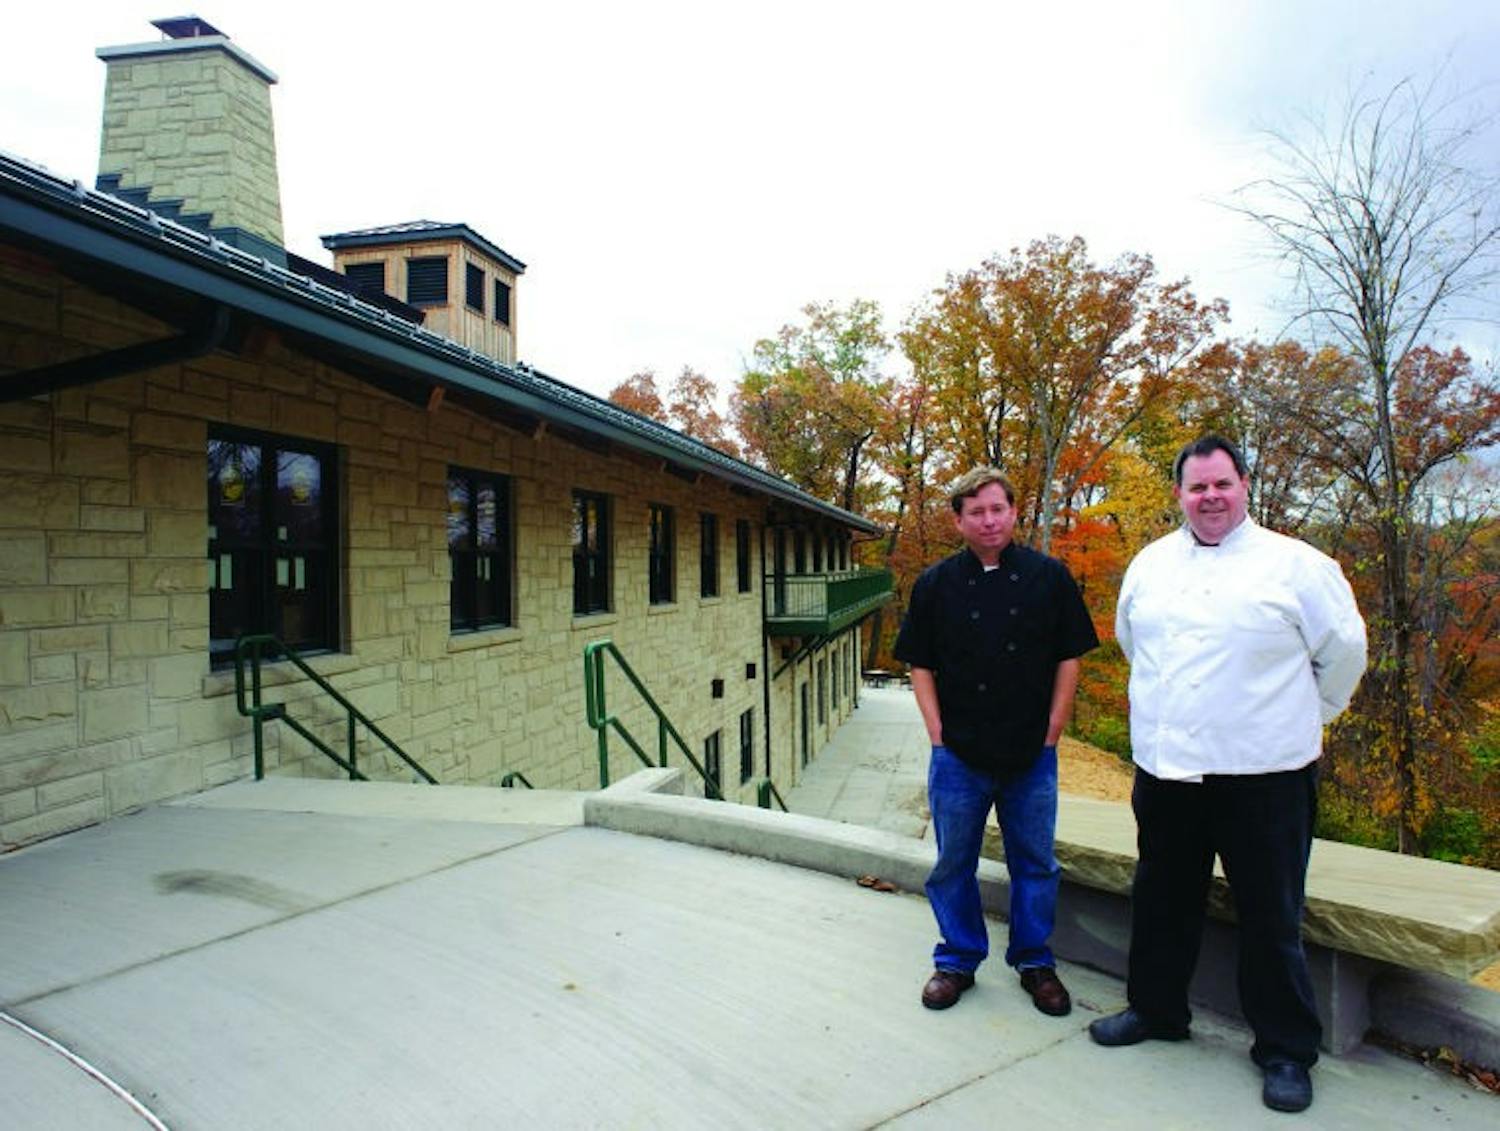 Lodge in Vinton County to be reopened by former OU employees  